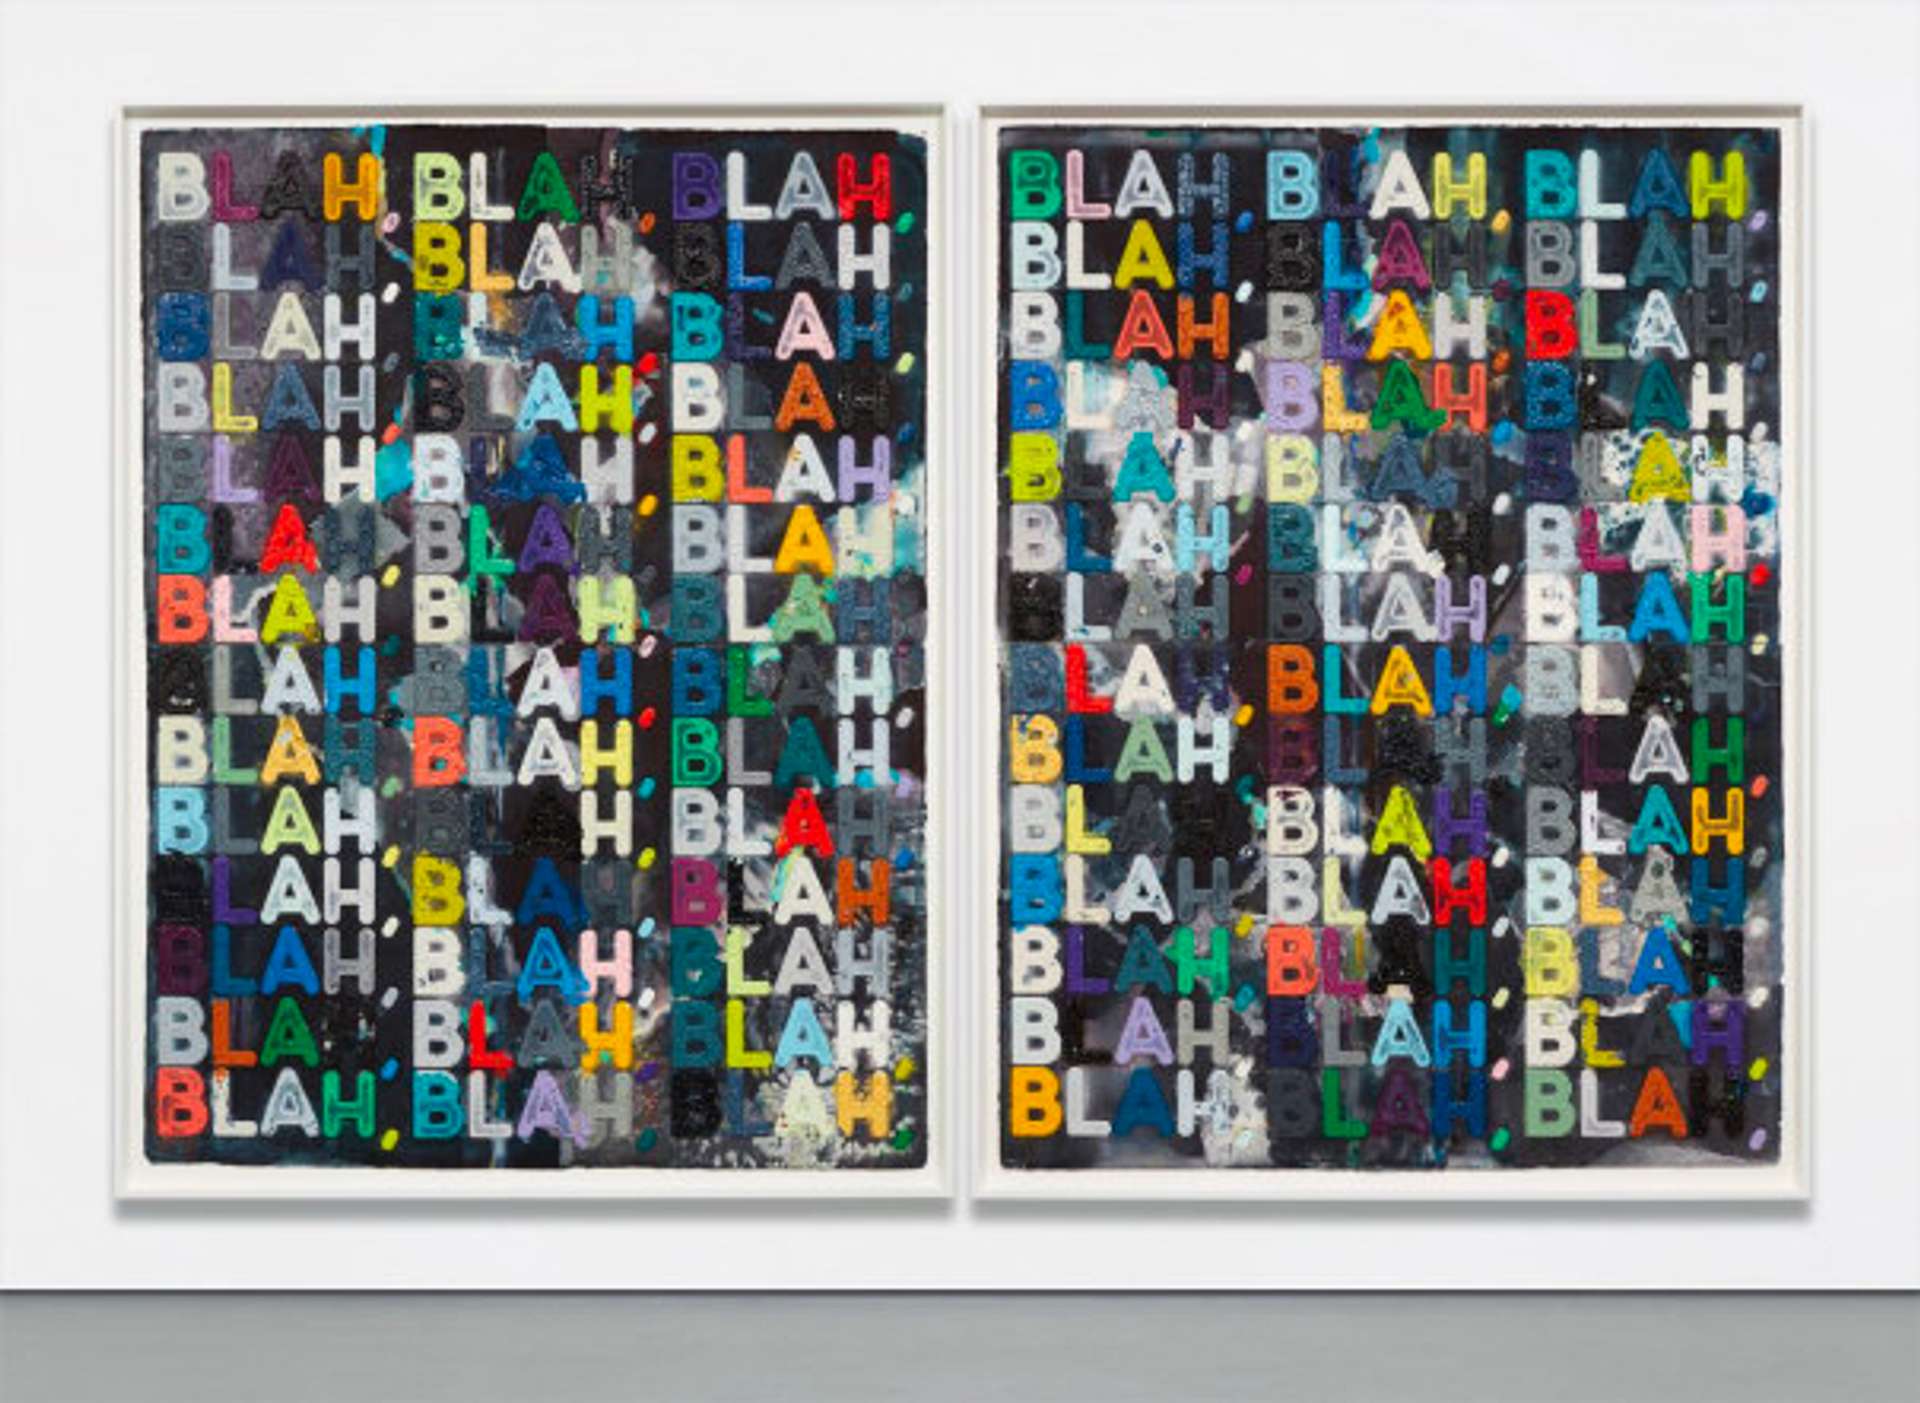 Two large-scale canvases, displayed in a white gallery space, hang side by side. Each canvas features the repeated words "Blah, Blah, Blah" from top to bottom. The individual letters are presented in diverse colours, juxtaposed against a vibrant and abstract background with splashes of colour.